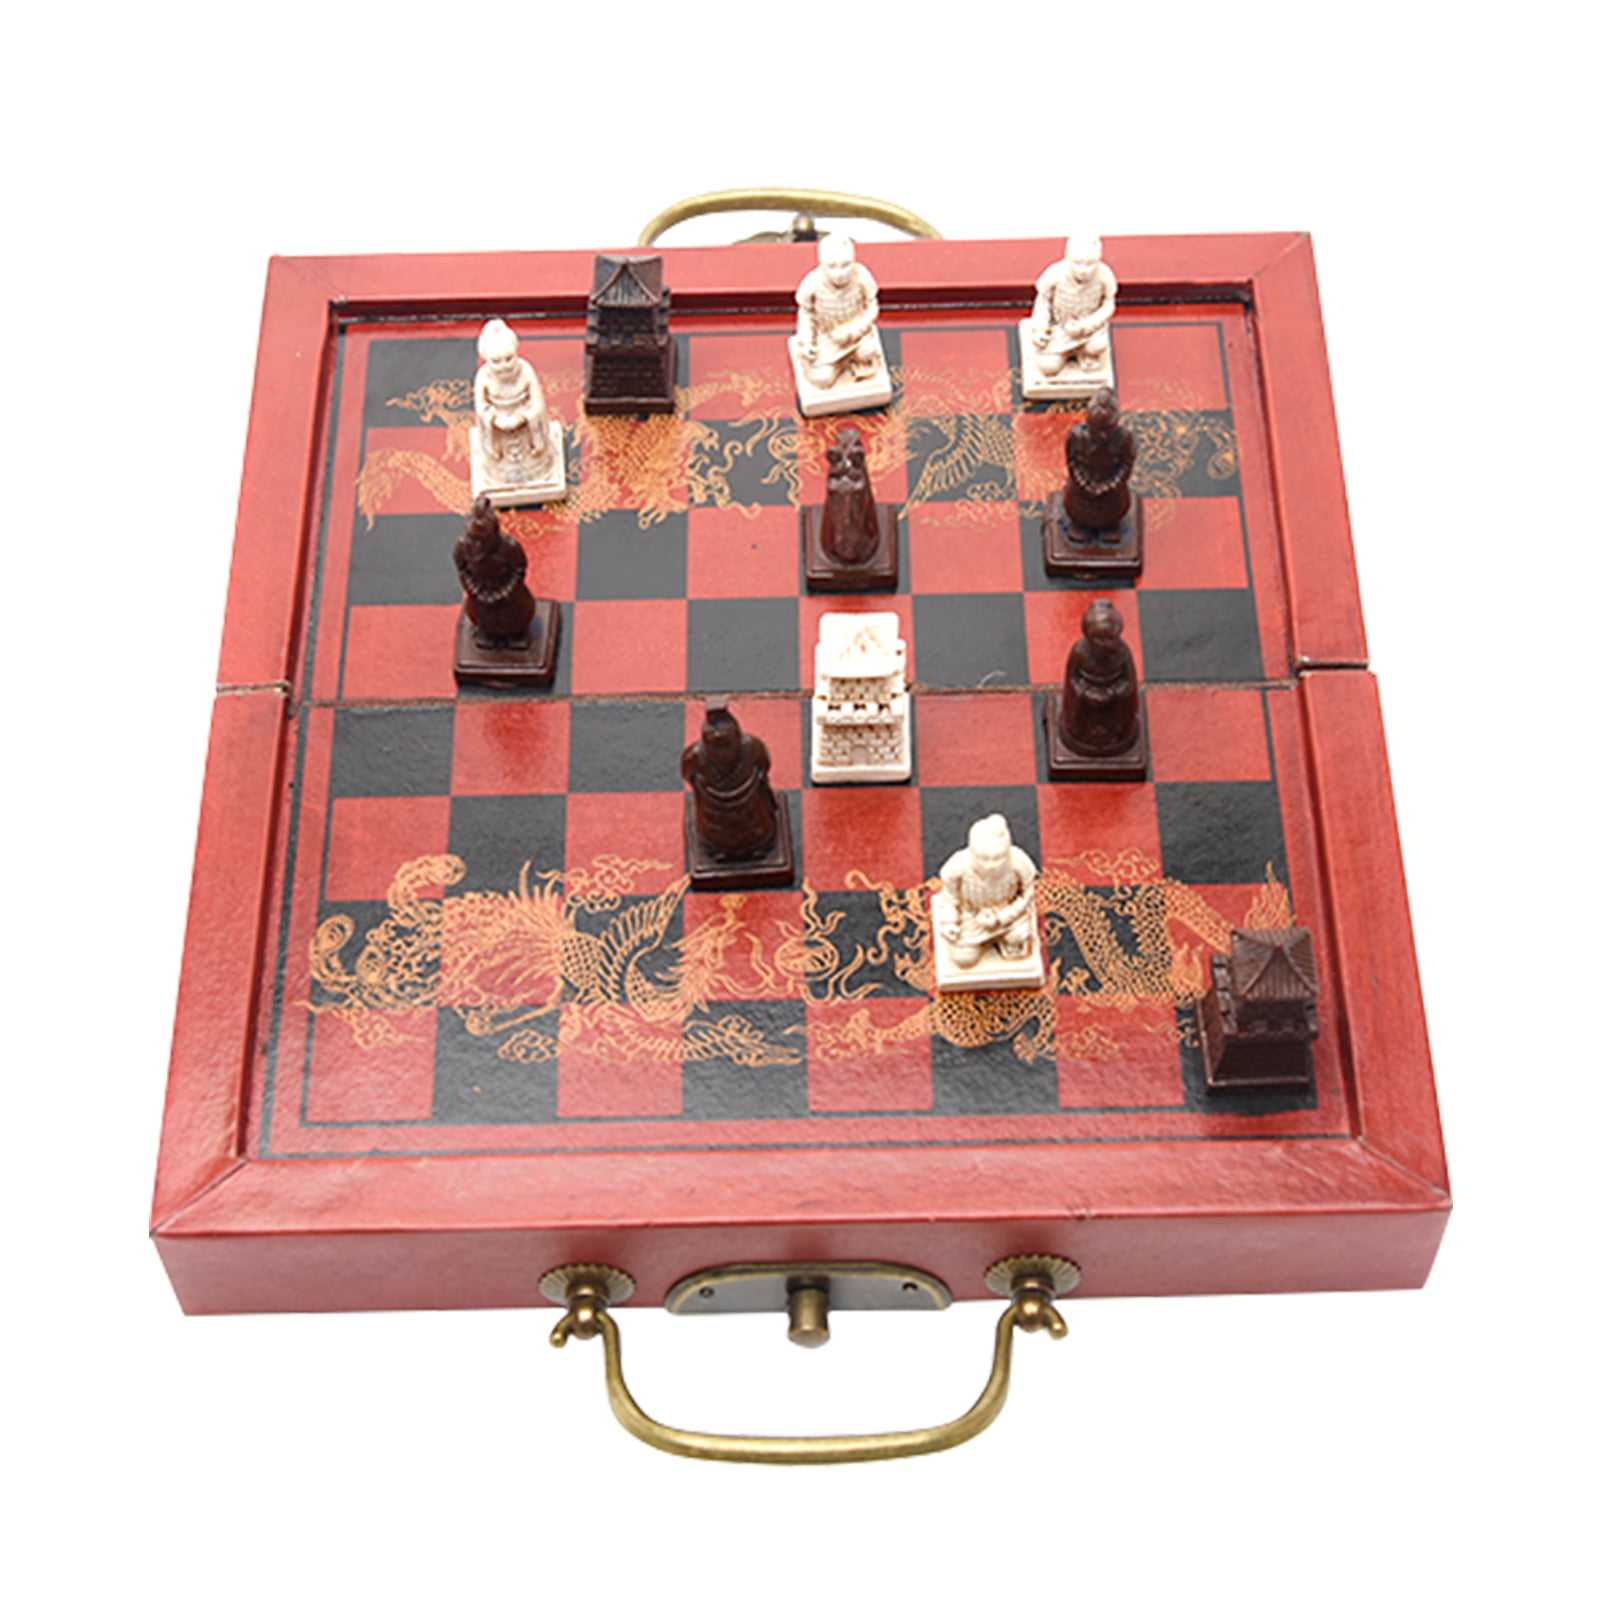 Details about   Hand Crafted Wooden Portable Folding Travel Board Chessboard Game Chess Set 